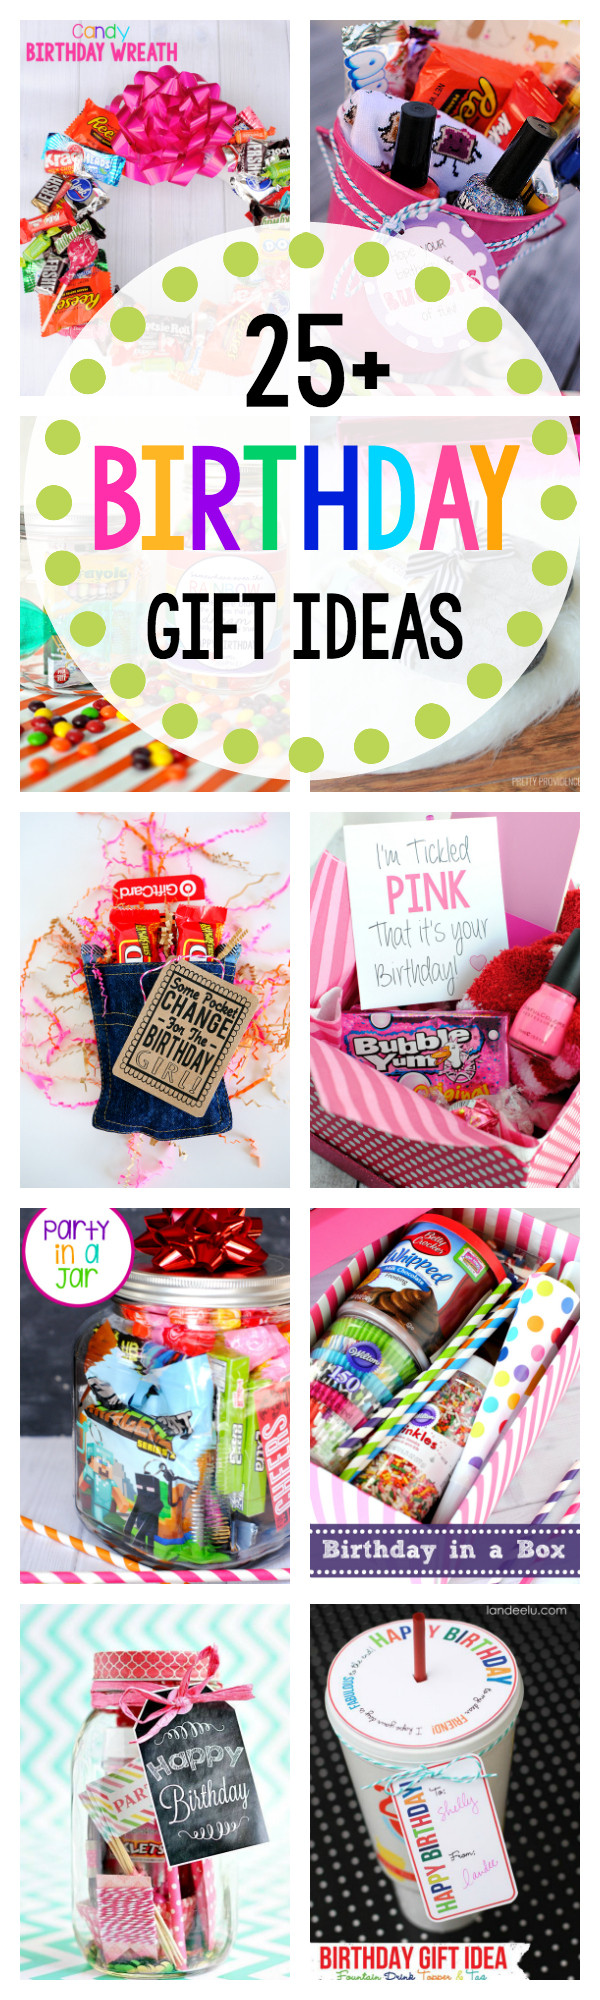 Amazing Birthday Gifts
 Fun Birthday Gift Ideas for Friends Crazy Little Projects